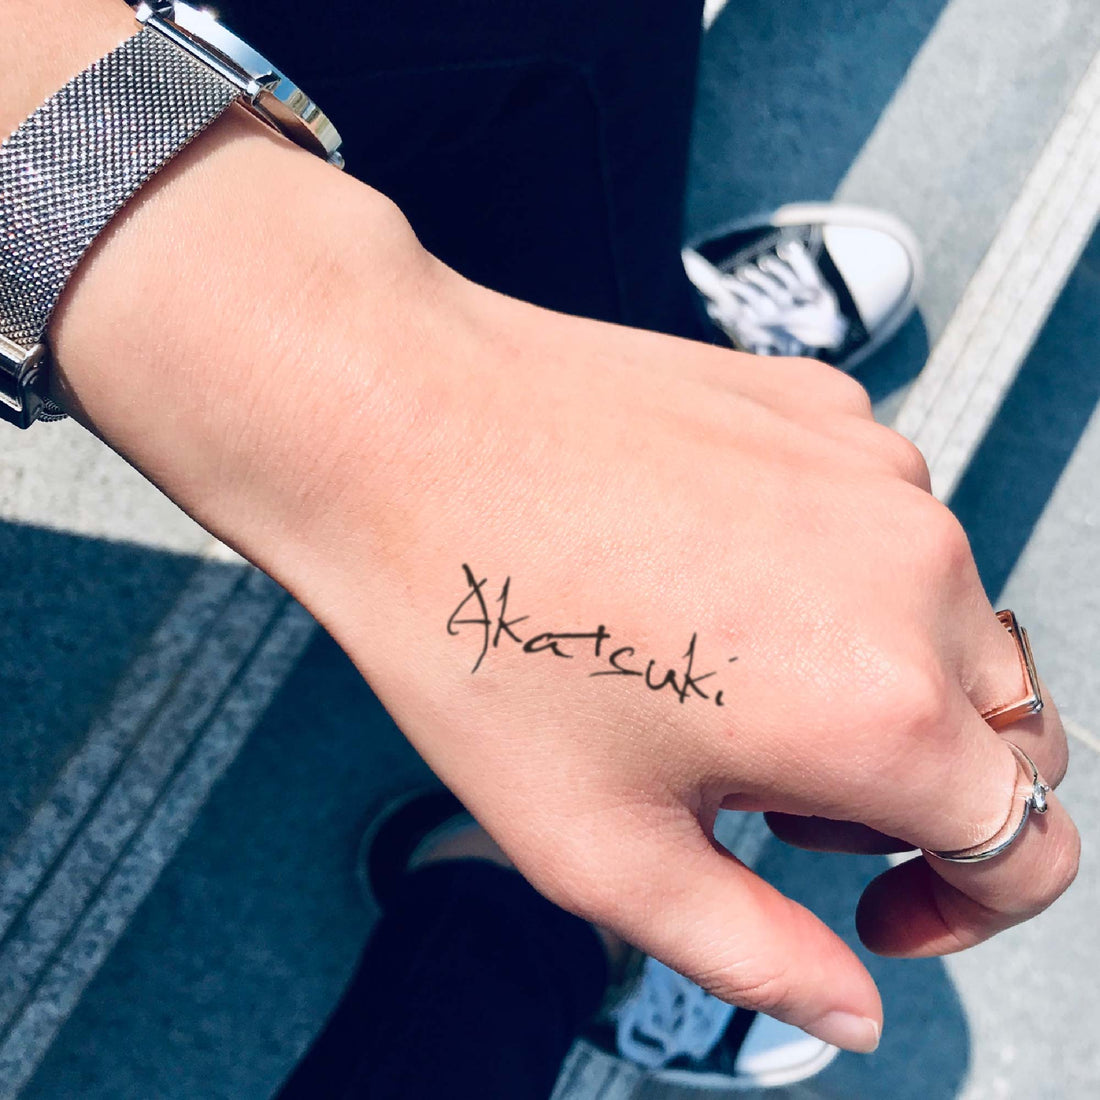 Akatsuki custom temporary tattoo sticker design idea inspiration meanings removal arm wrist hand words font name signature calligraphy lyrics tour concert outfits merch accessory gift souvenir costumes wear dress up code